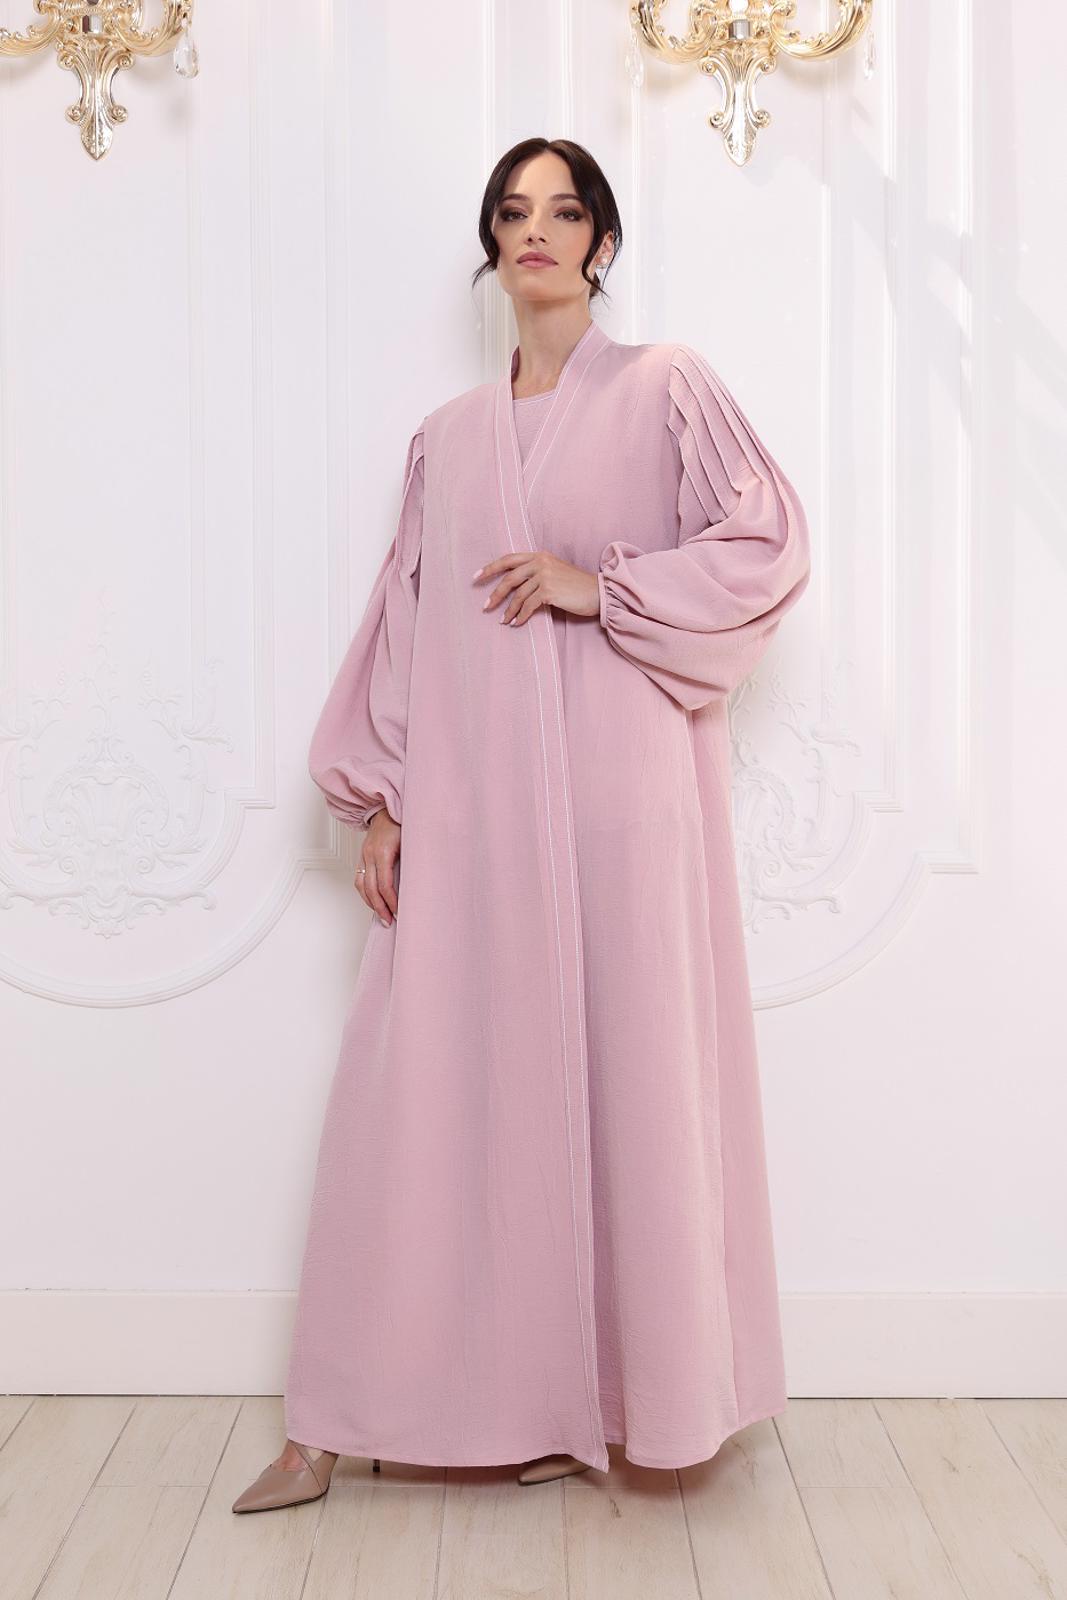 This chic Abaya is perfect everyday piece.